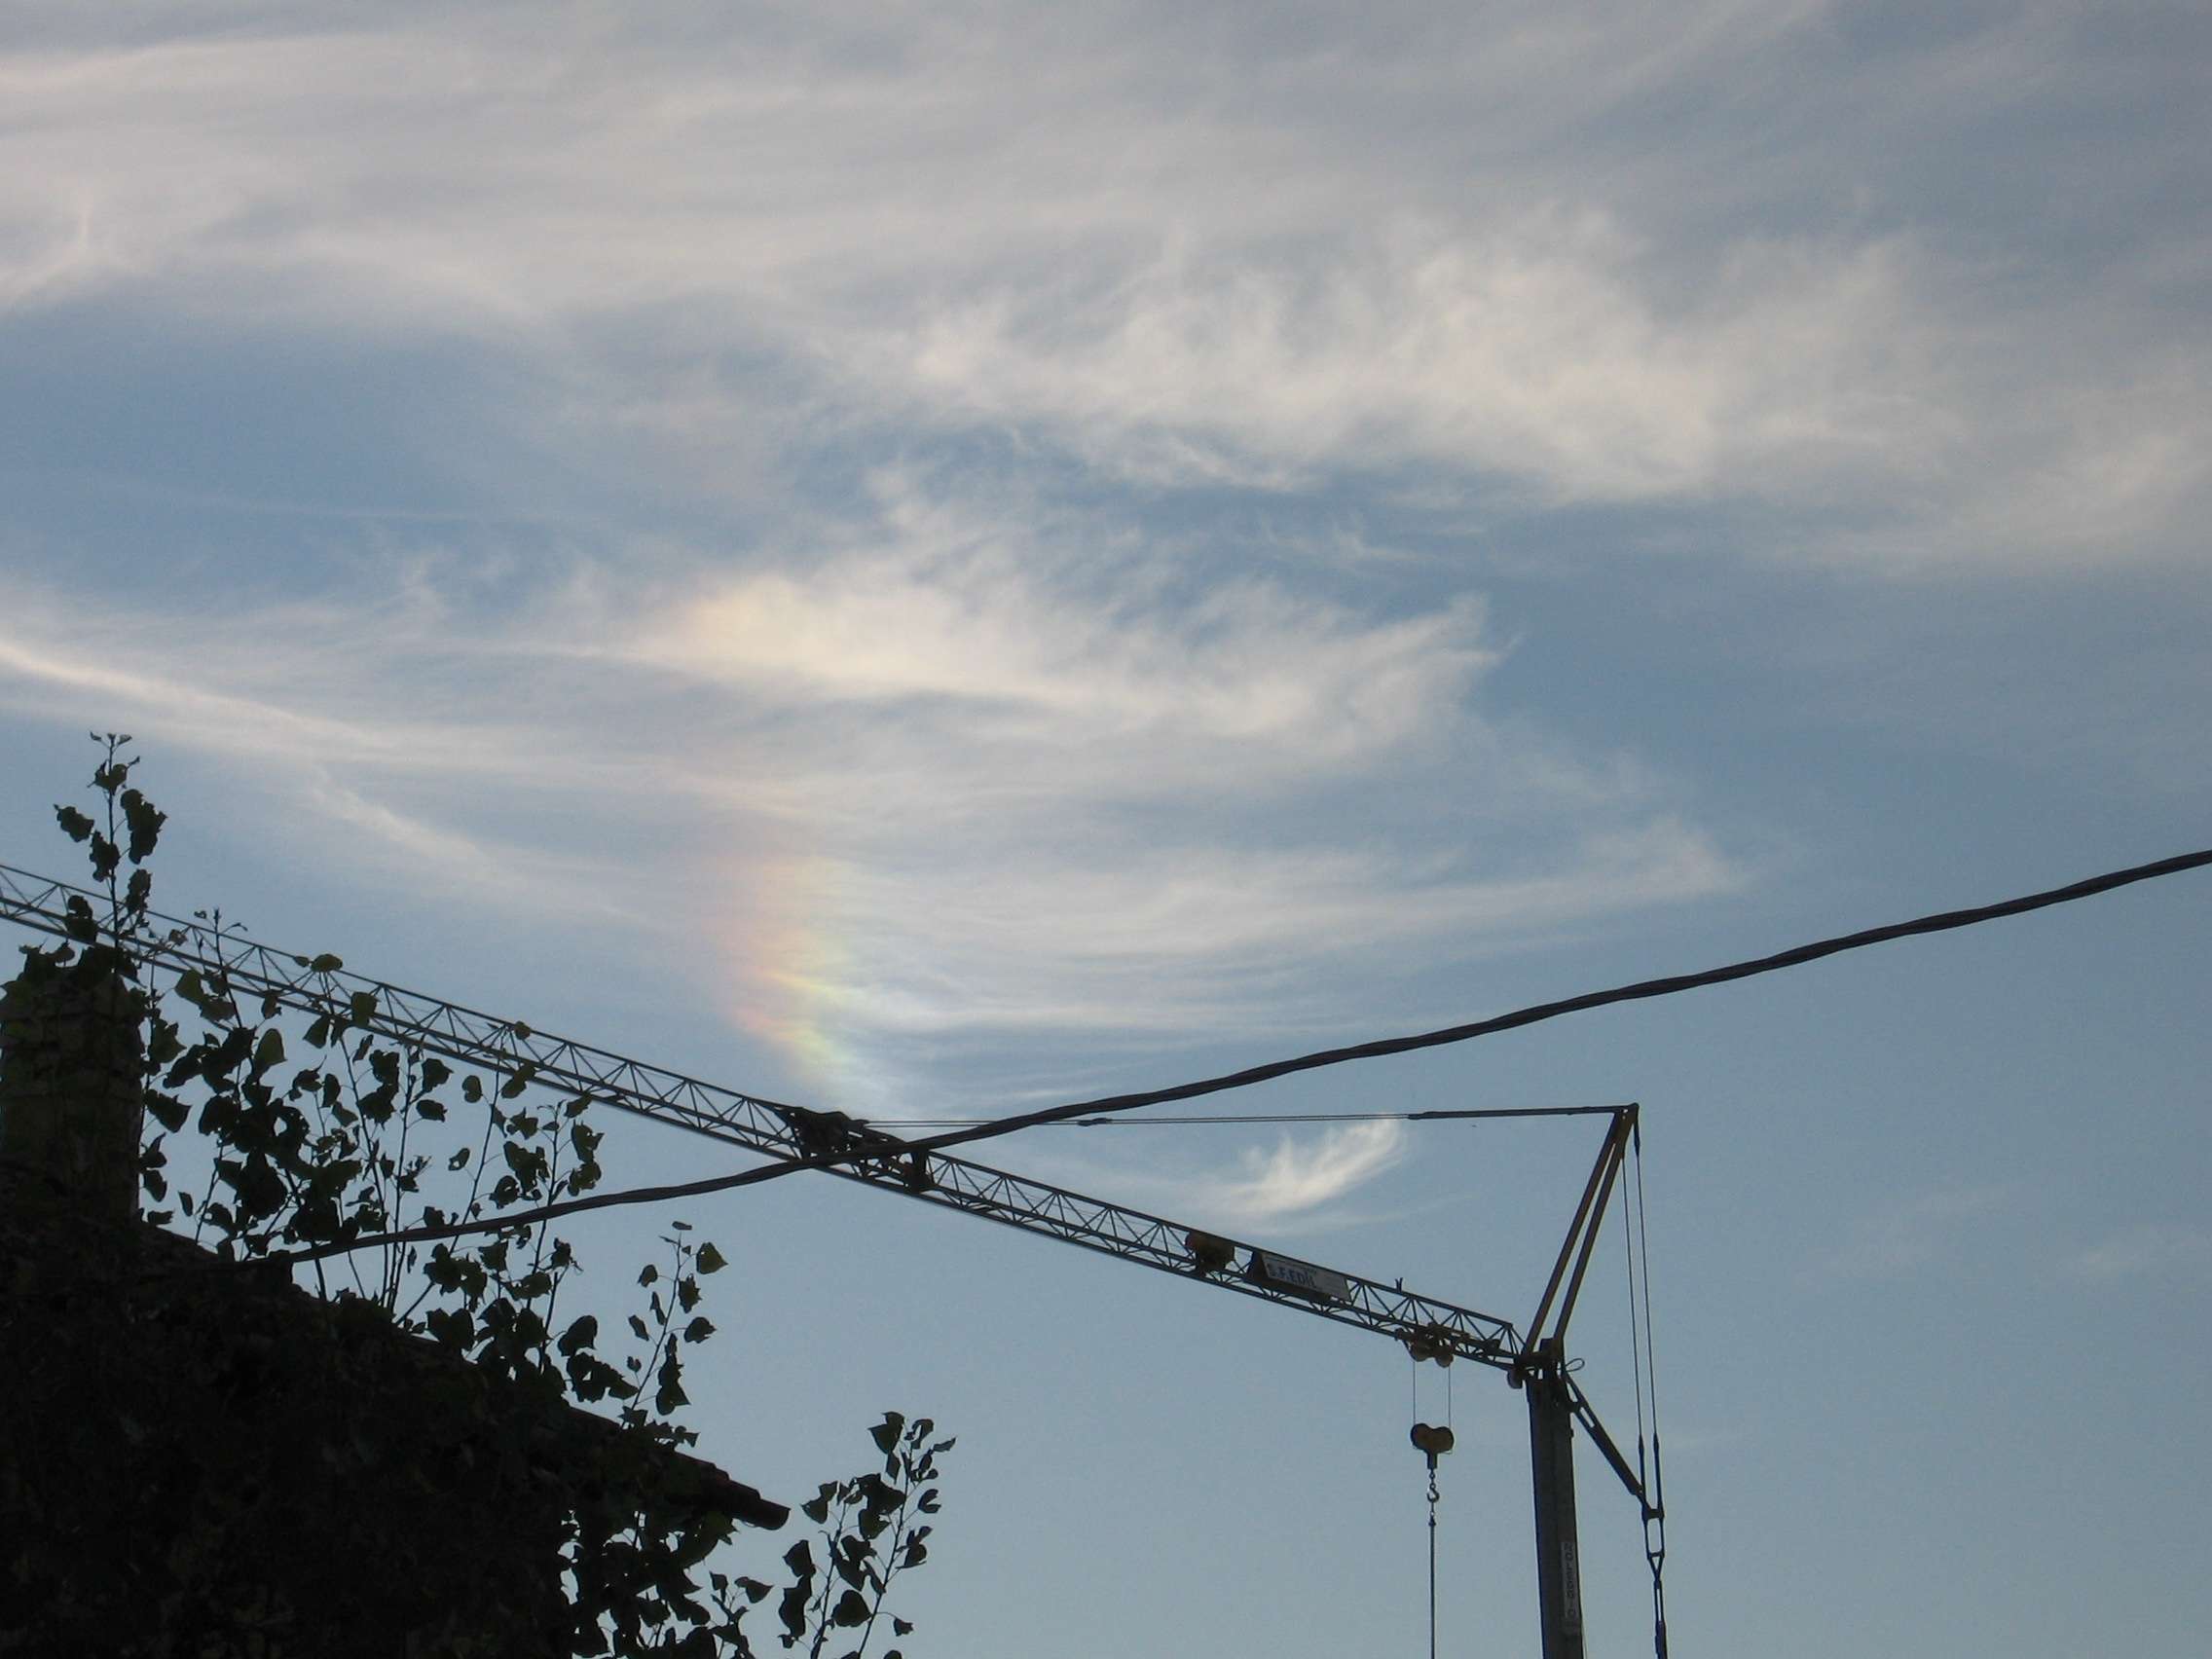 Right sundog: 171 KB; click on the image to enlarge at 2272x1704 pixels